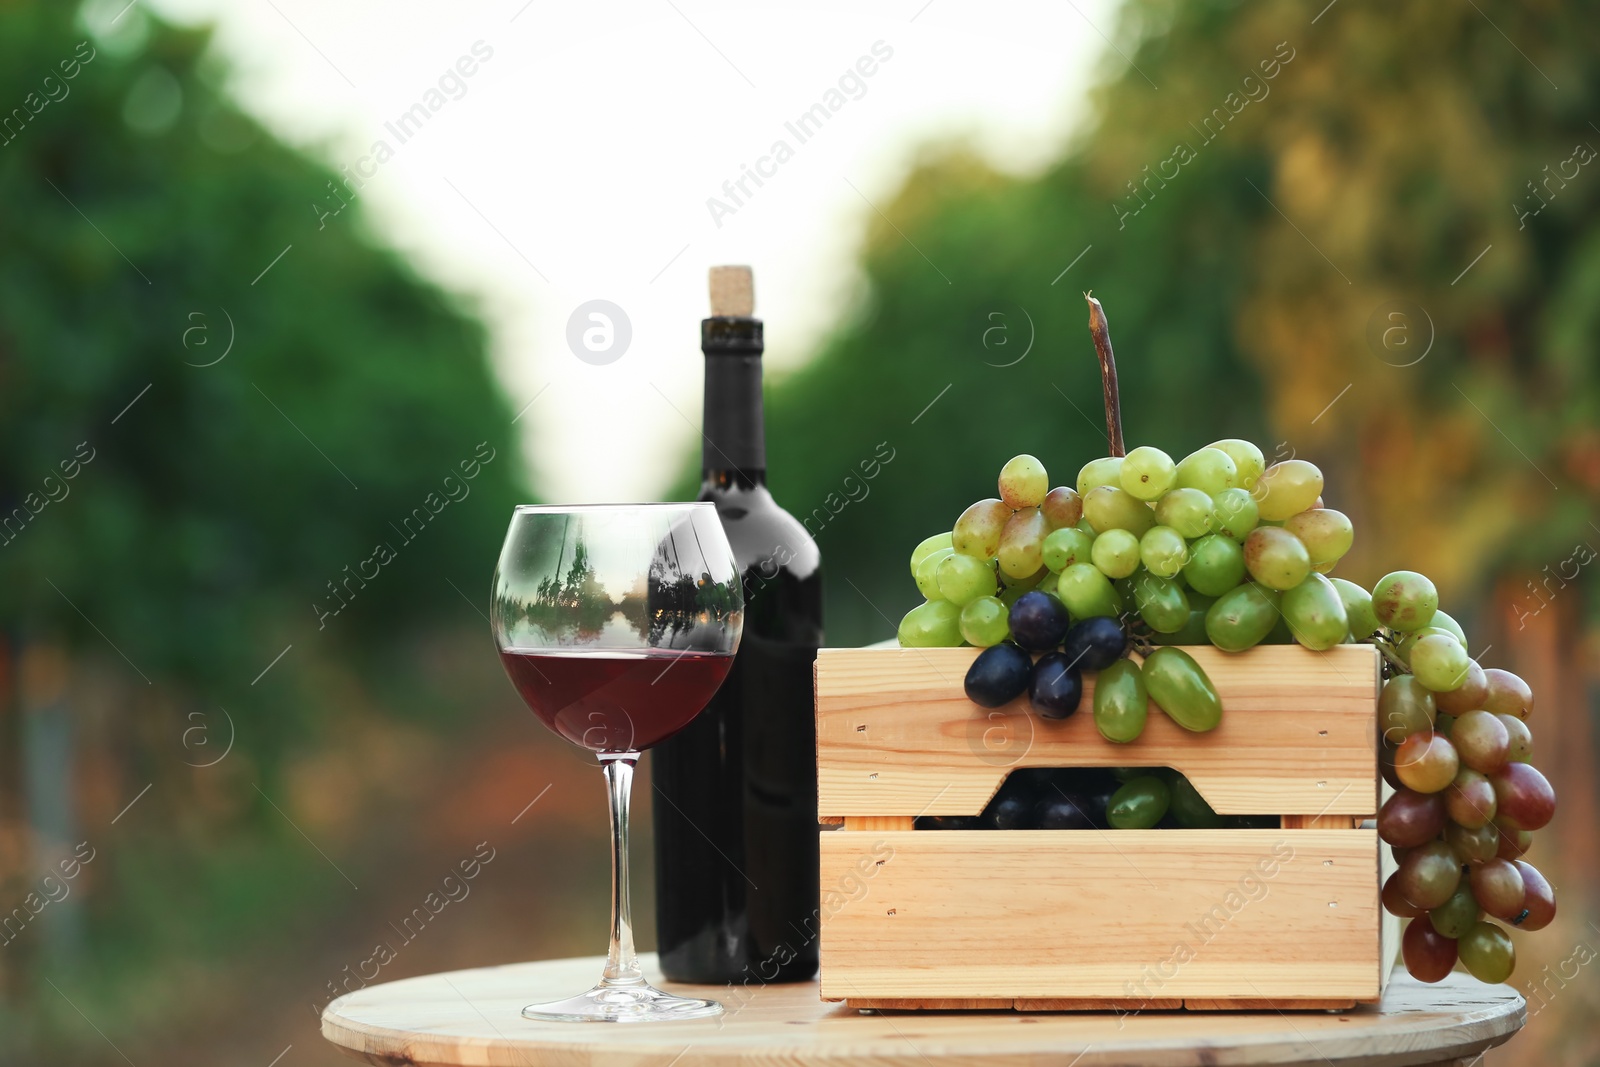 Photo of Bottle and glass of red wine with fresh grapes on wooden table in vineyard